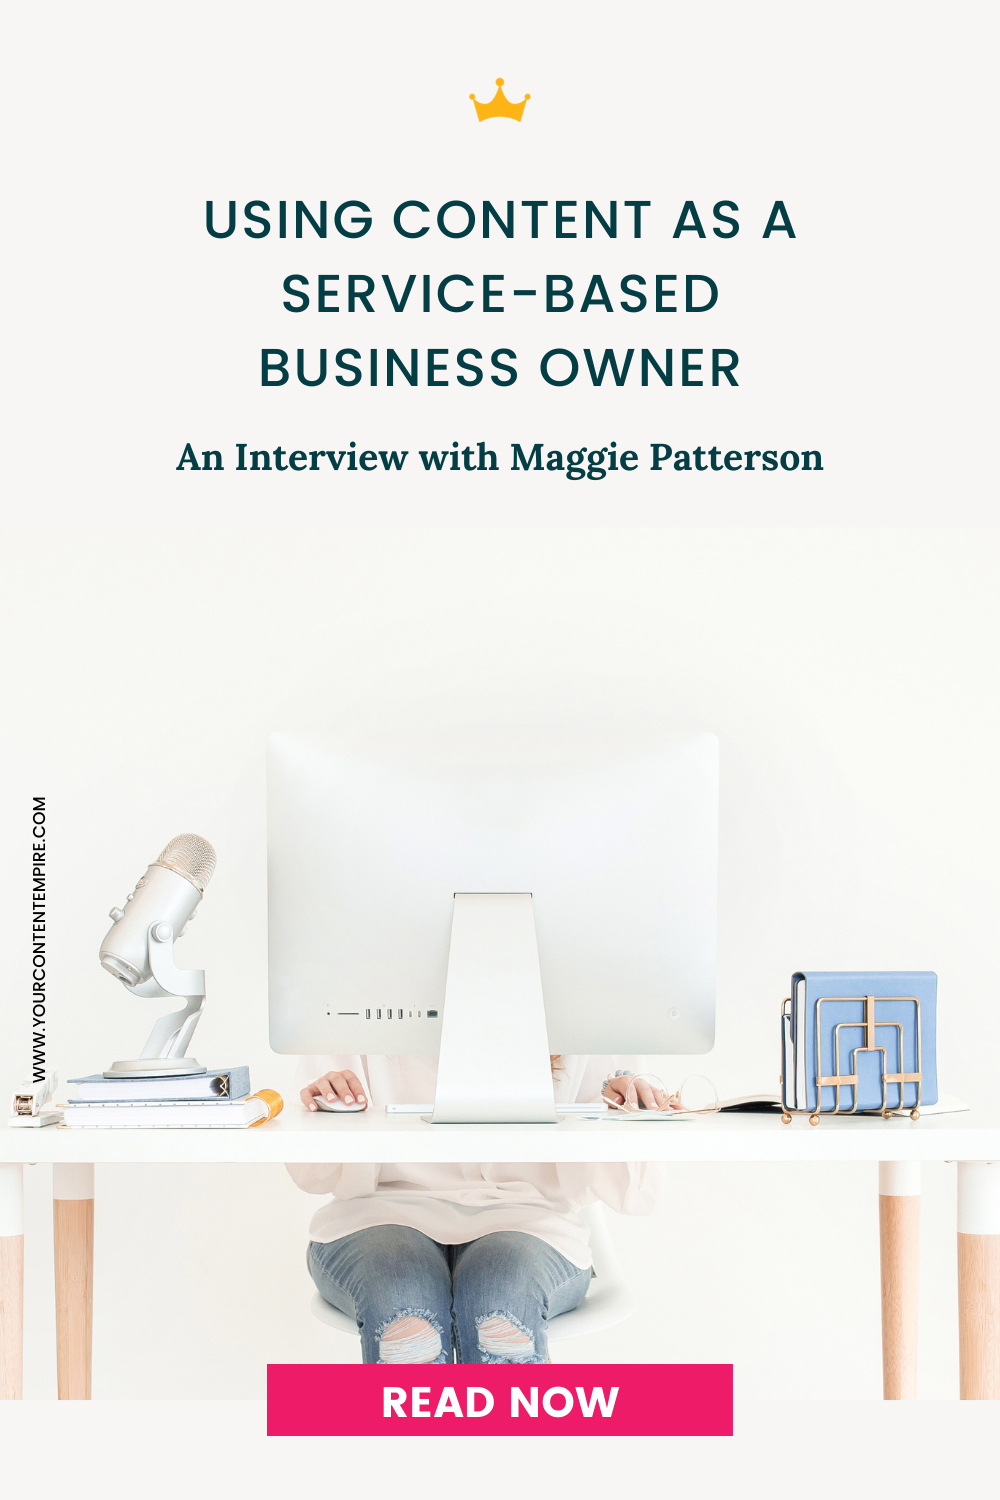 Using Content as a Service-Based Business Owner